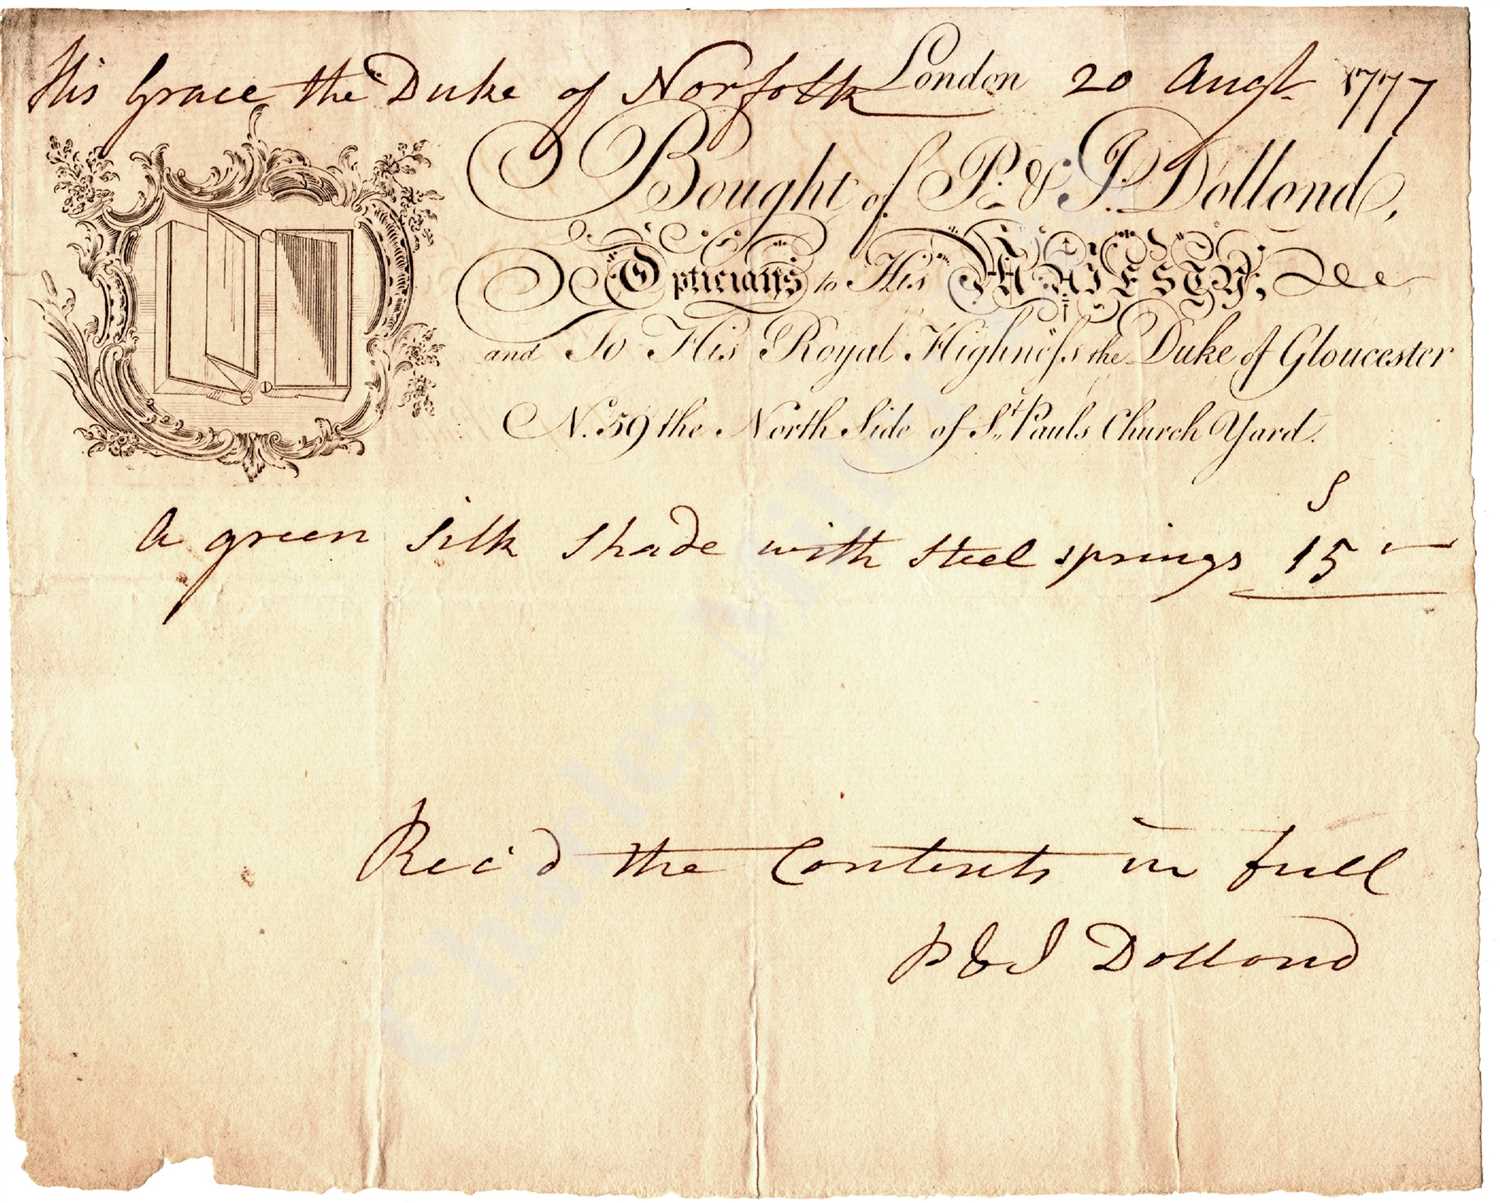 Lot 277 - A RARE AUTOGRAPHED BILL OF SALE BY JESSE RAMSDEN, 1772